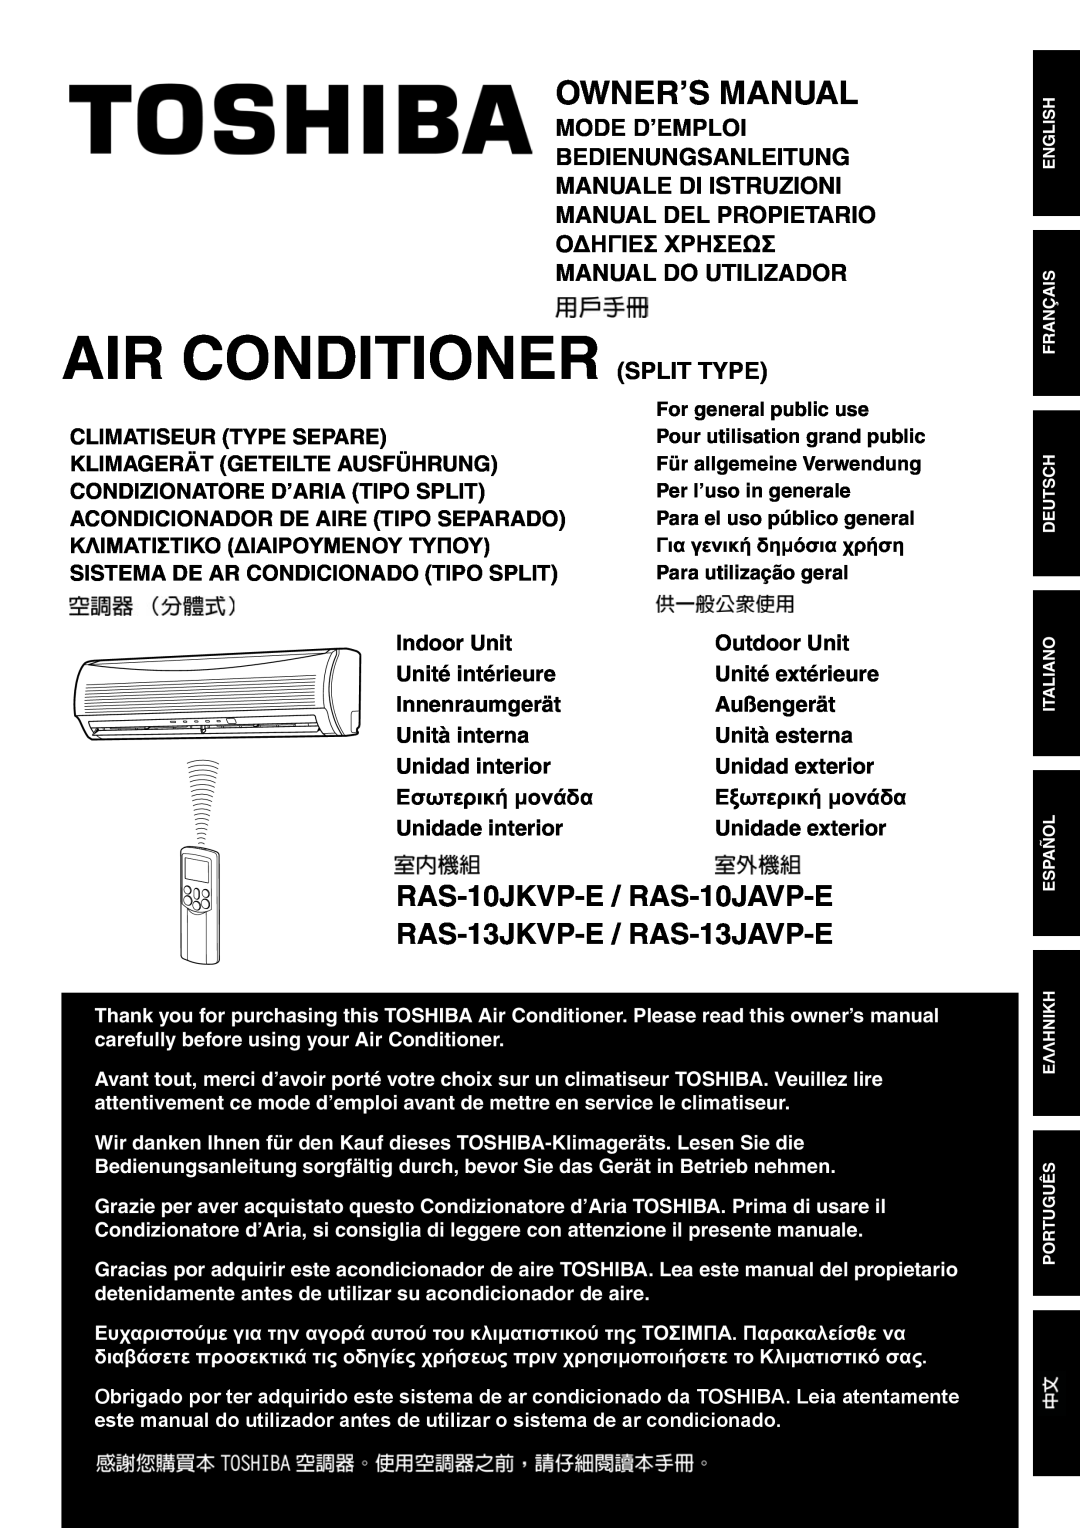 Toshiba owner manual Air Conditioner Split Type, RAS-10JKVP-E / RAS-10JAVP-E, RAS-13JKVP-E / RAS-13JAVP-E 